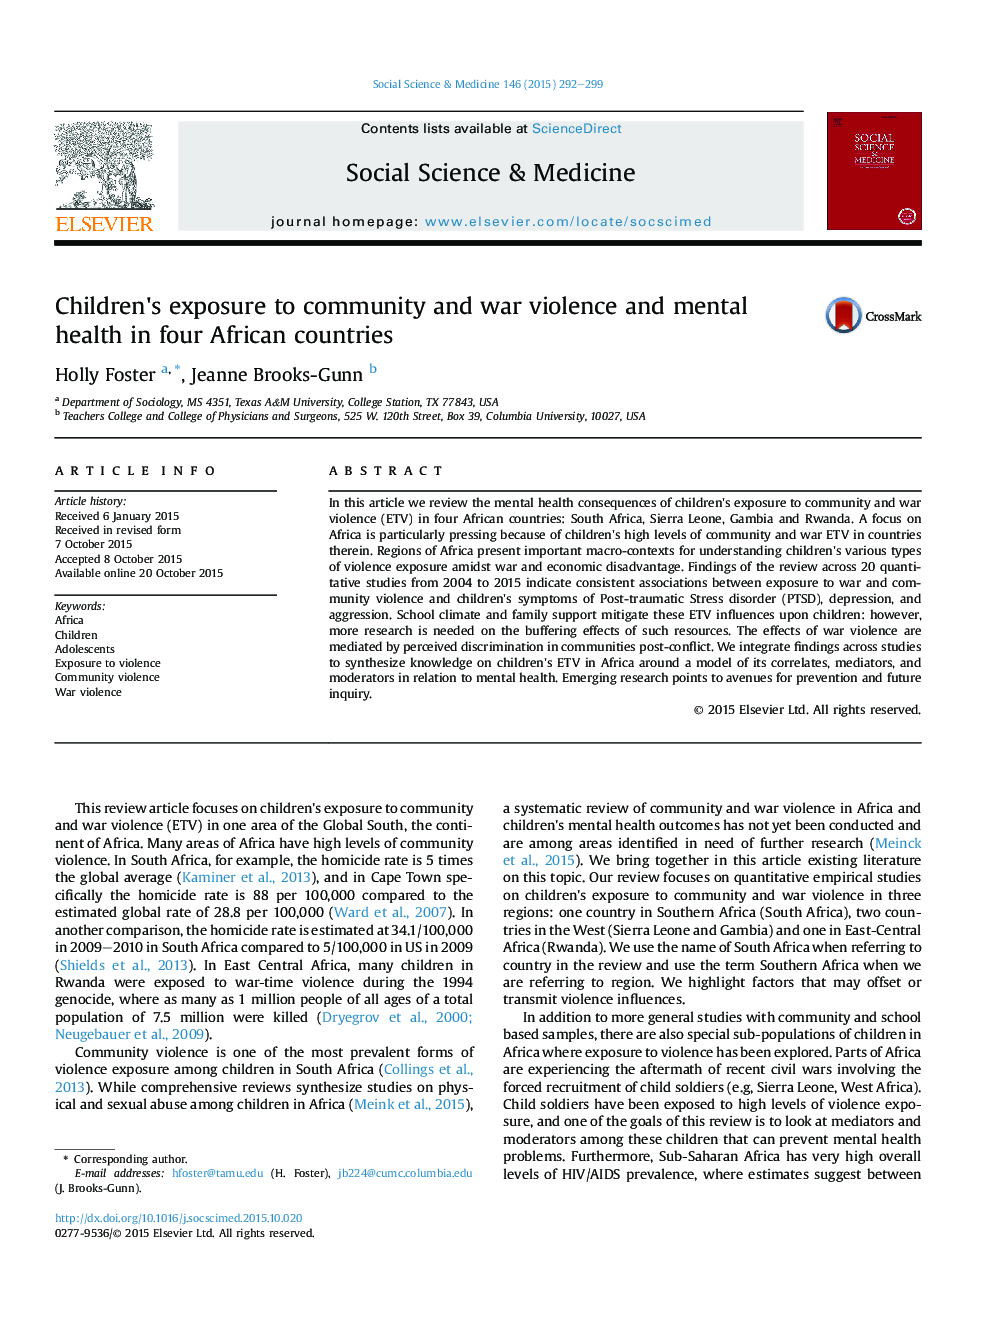 Children's exposure to community and war violence and mental health in four African countries